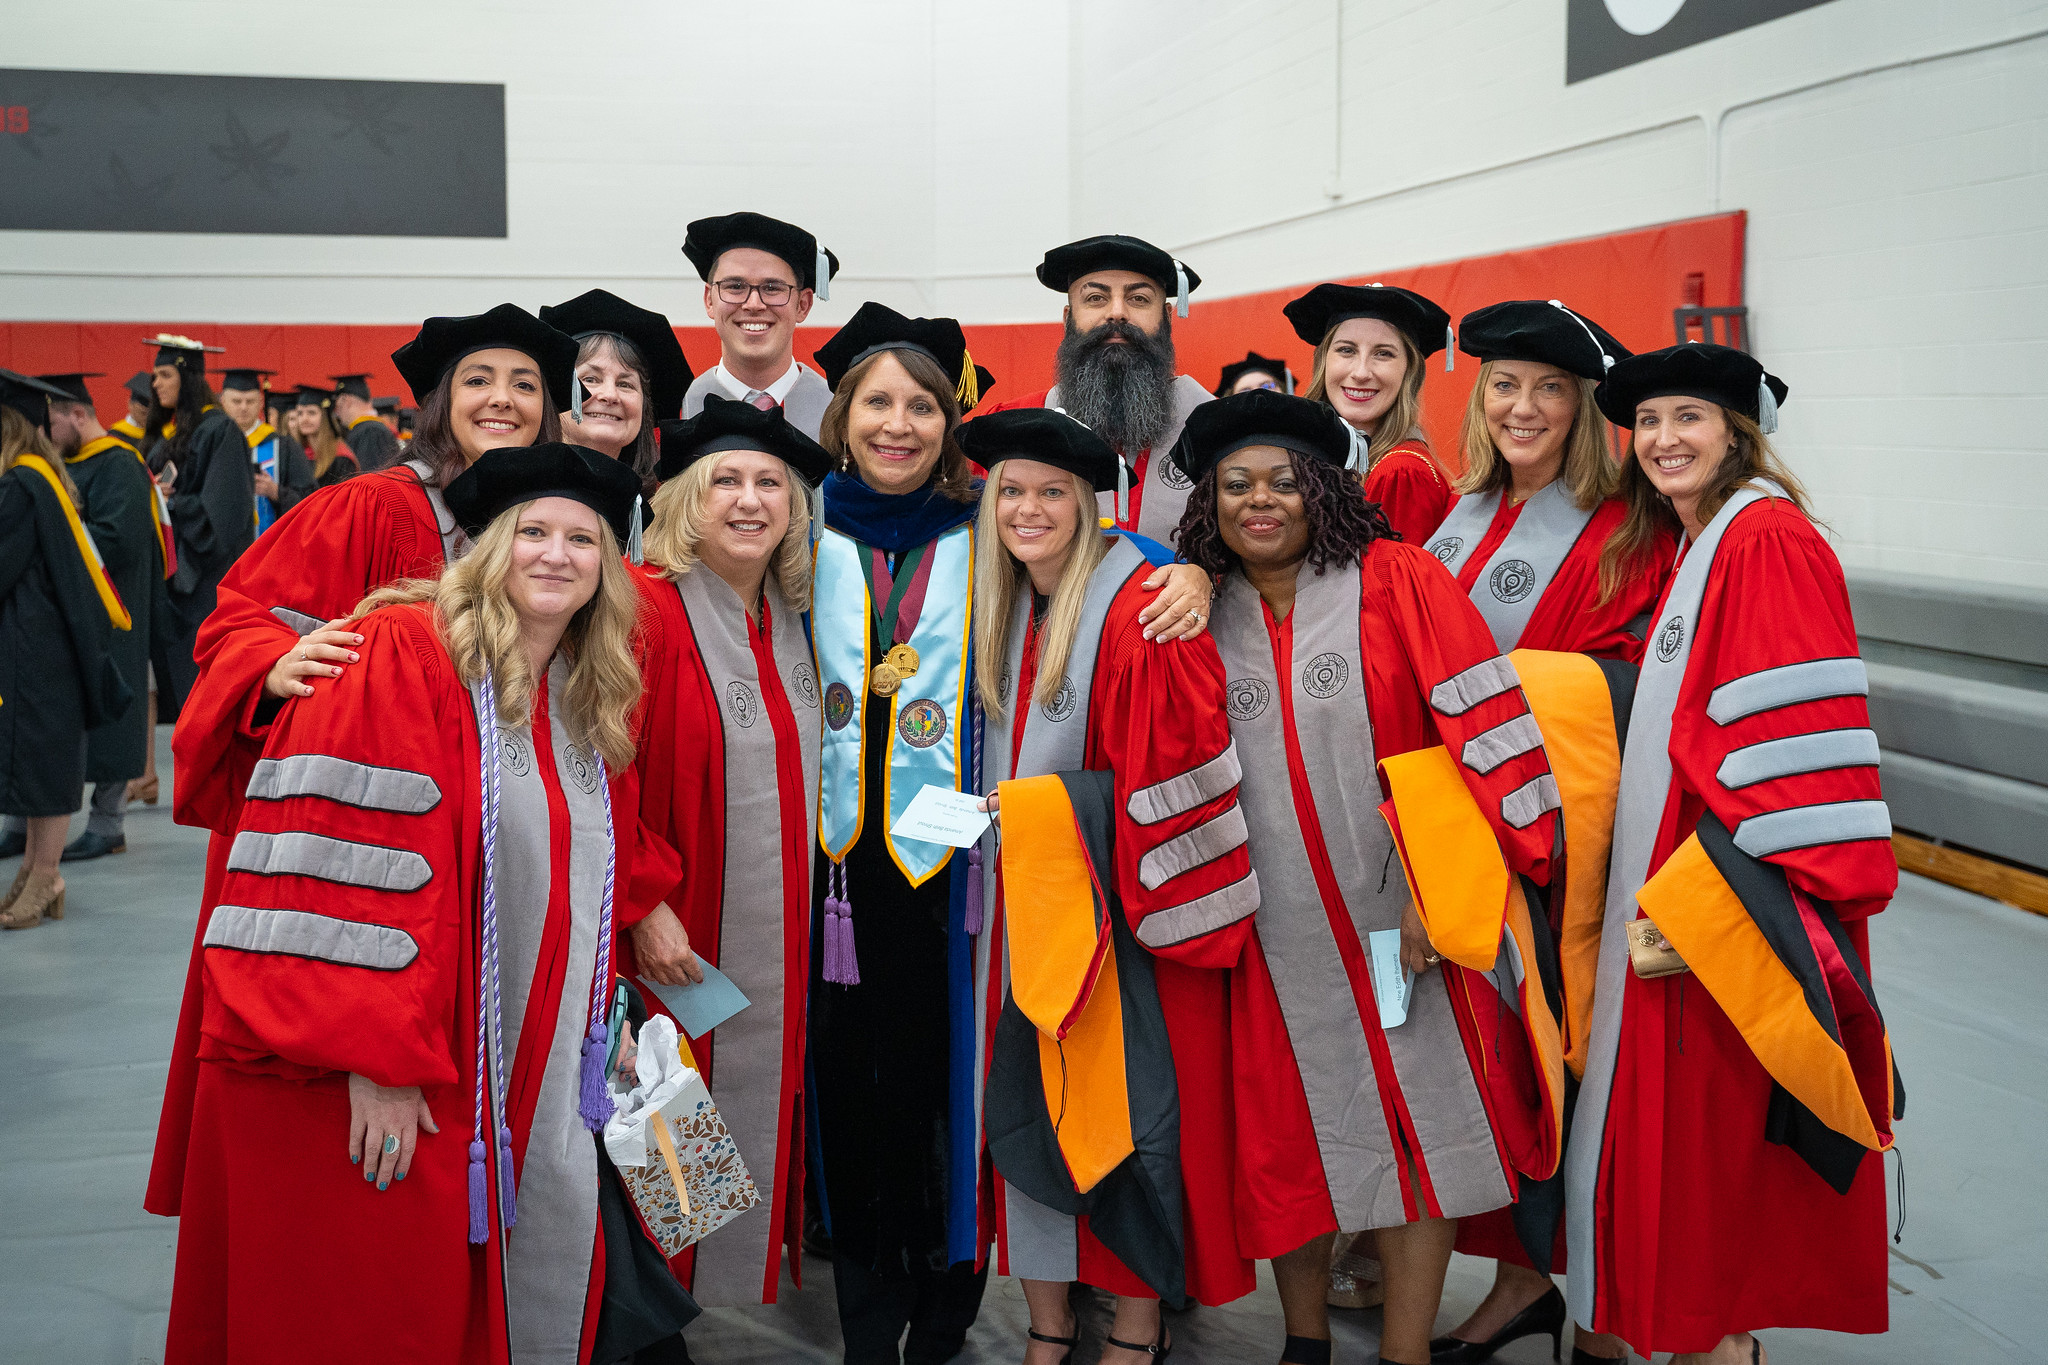 group of PhD graduates posing with Dean Melnyk before Convocation ceremony